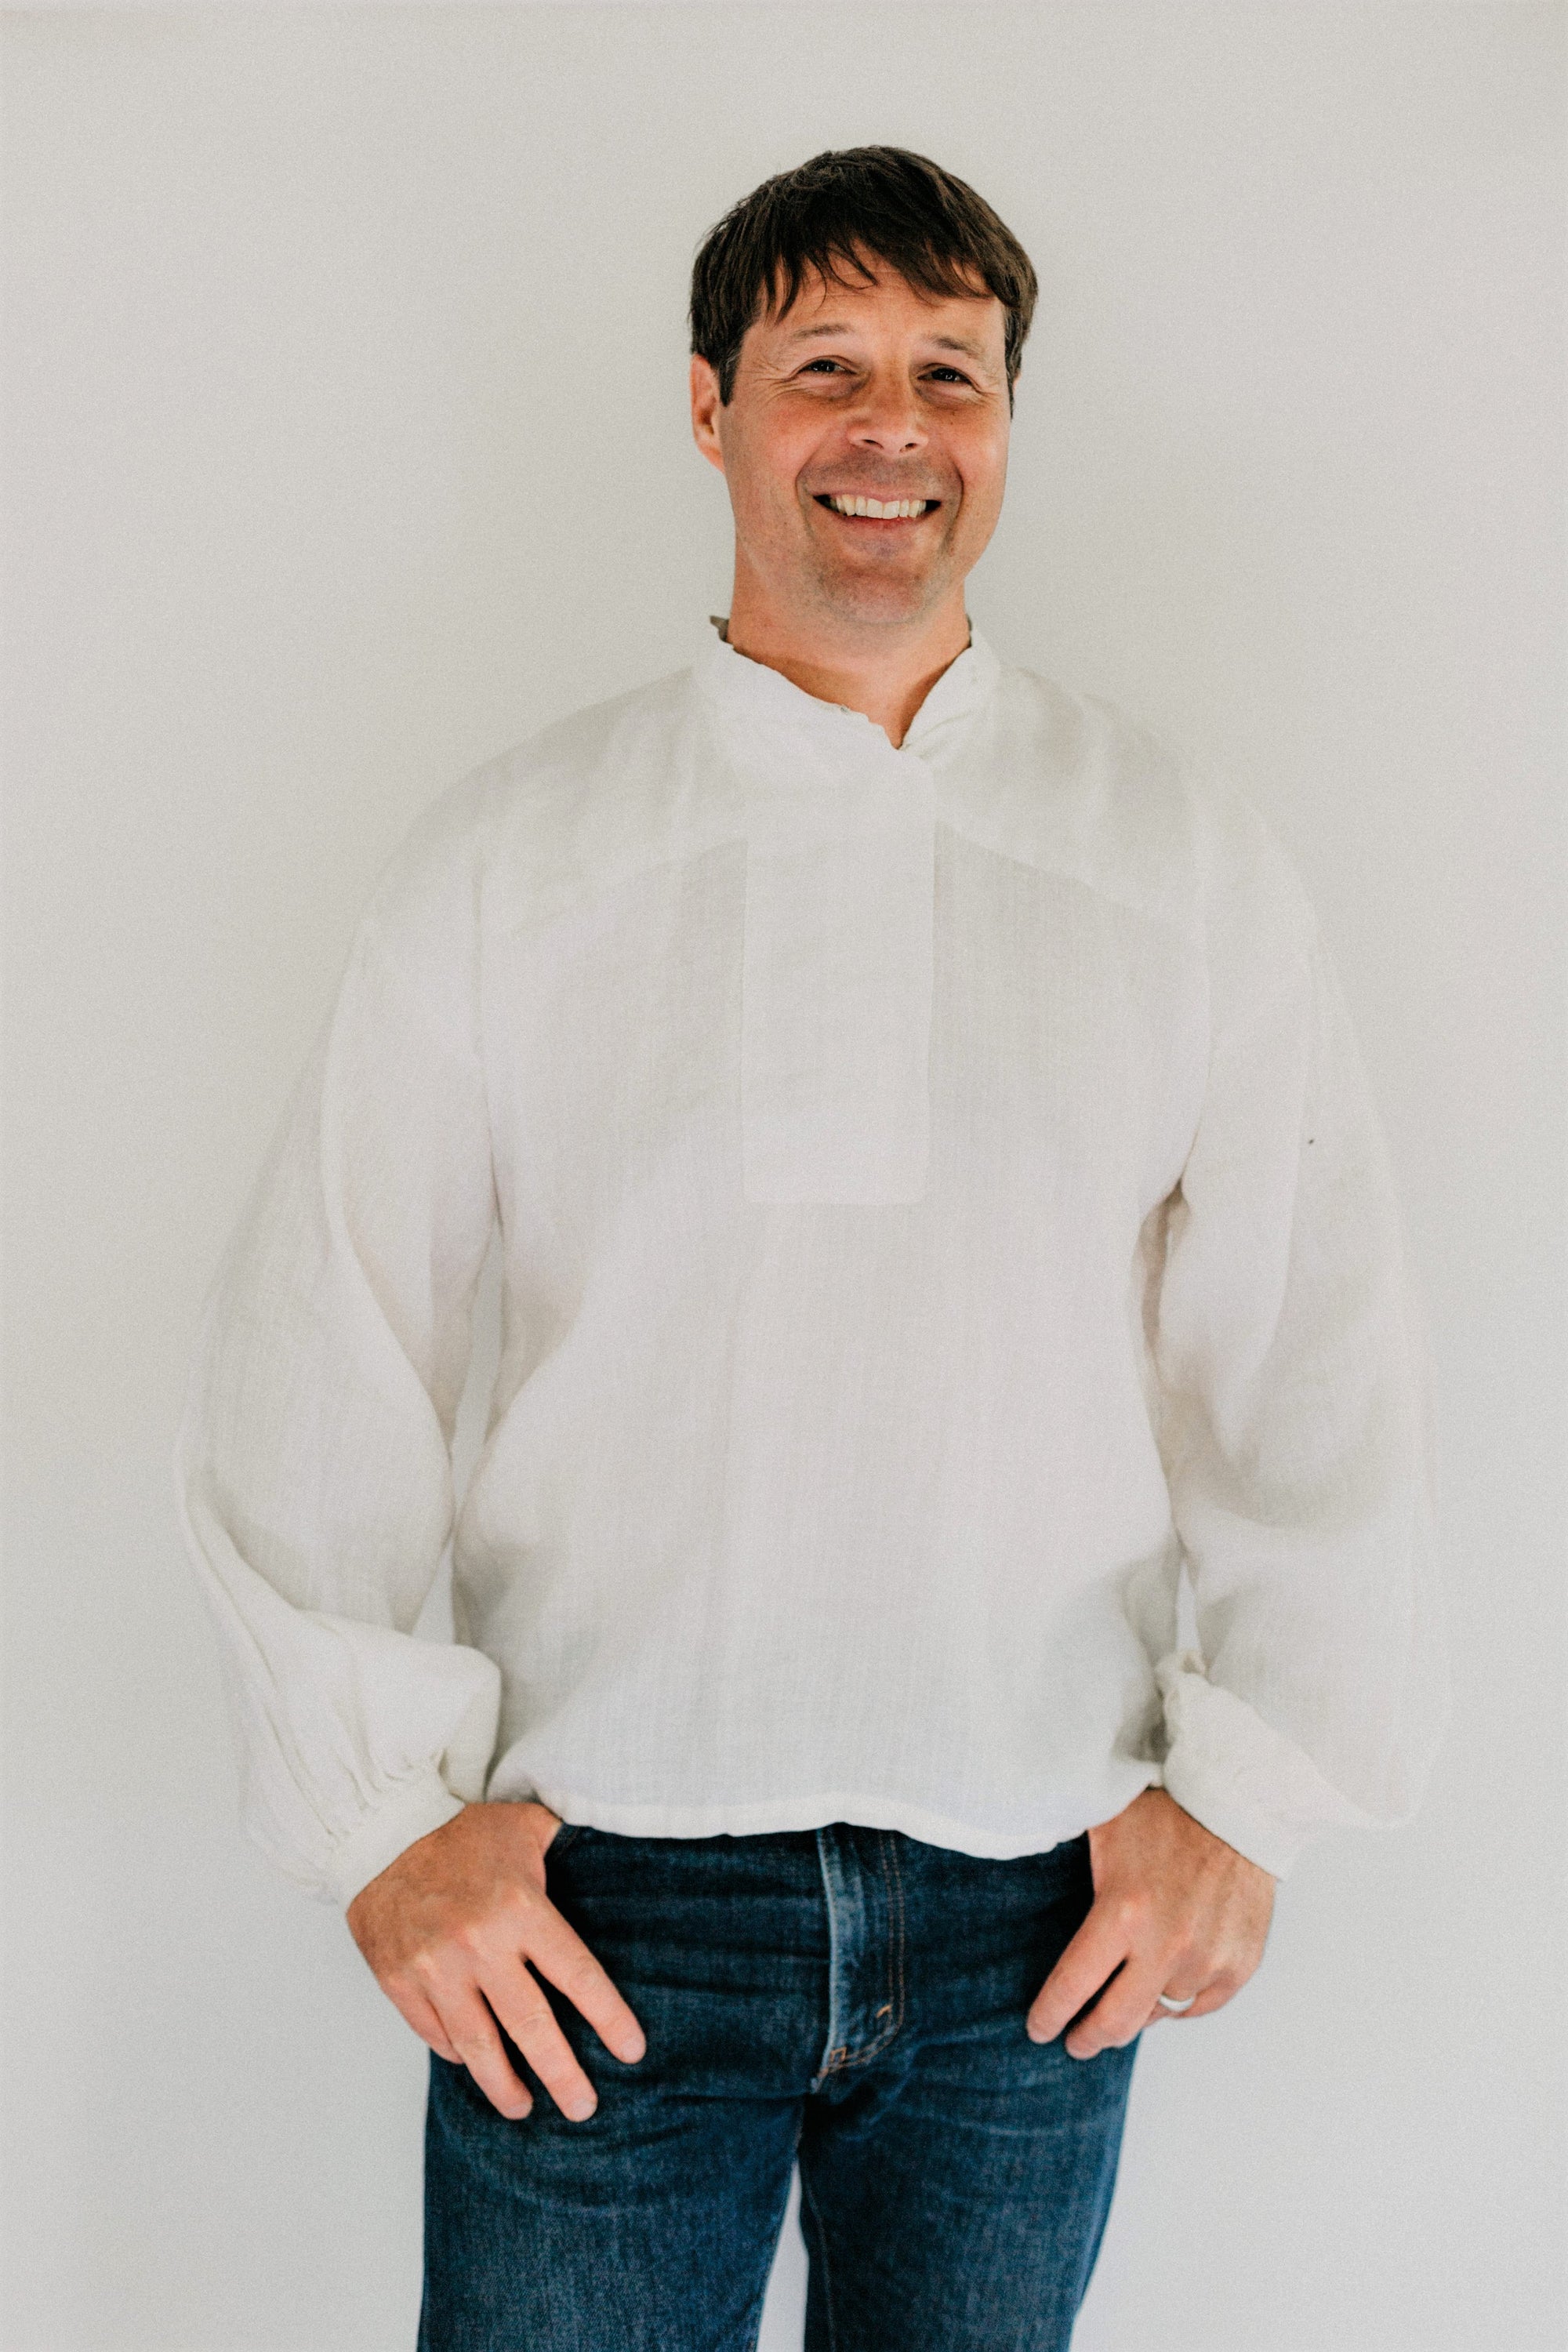 Man modeling View B a simple white cotton shirting.  He is wearing denim jeans and standing in front of a white backdrop.